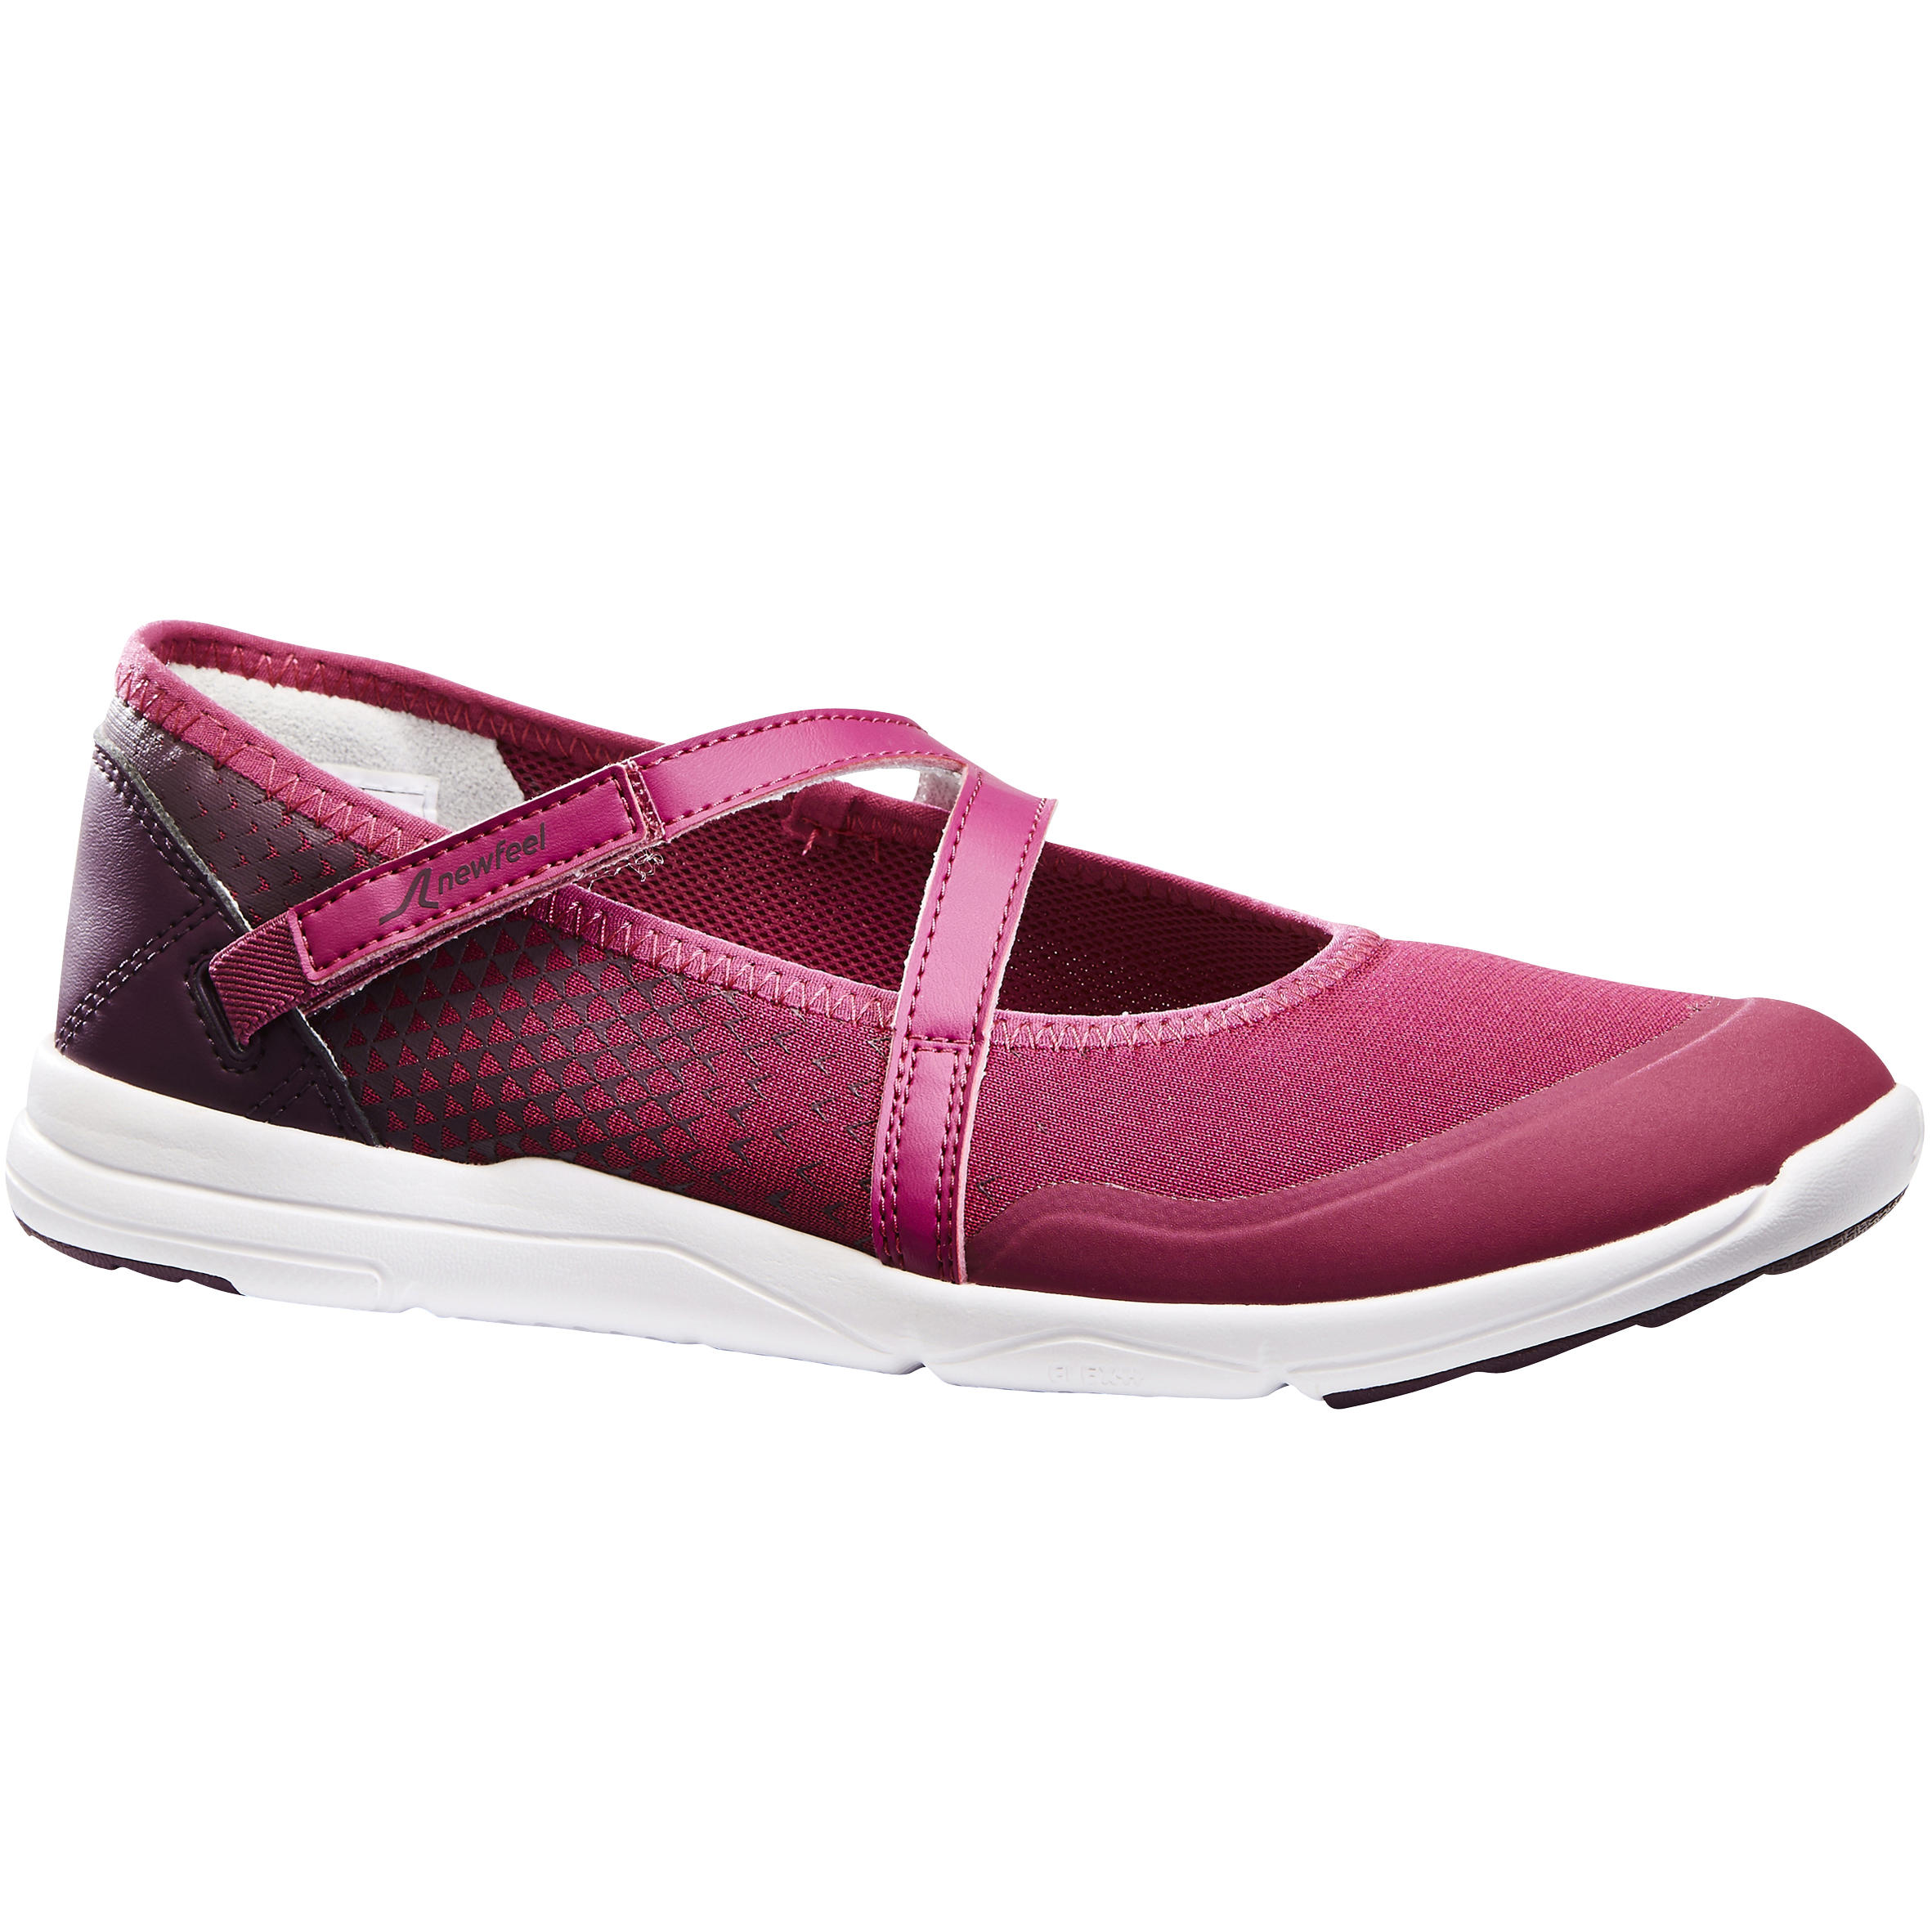 sports shoes for womens decathlon